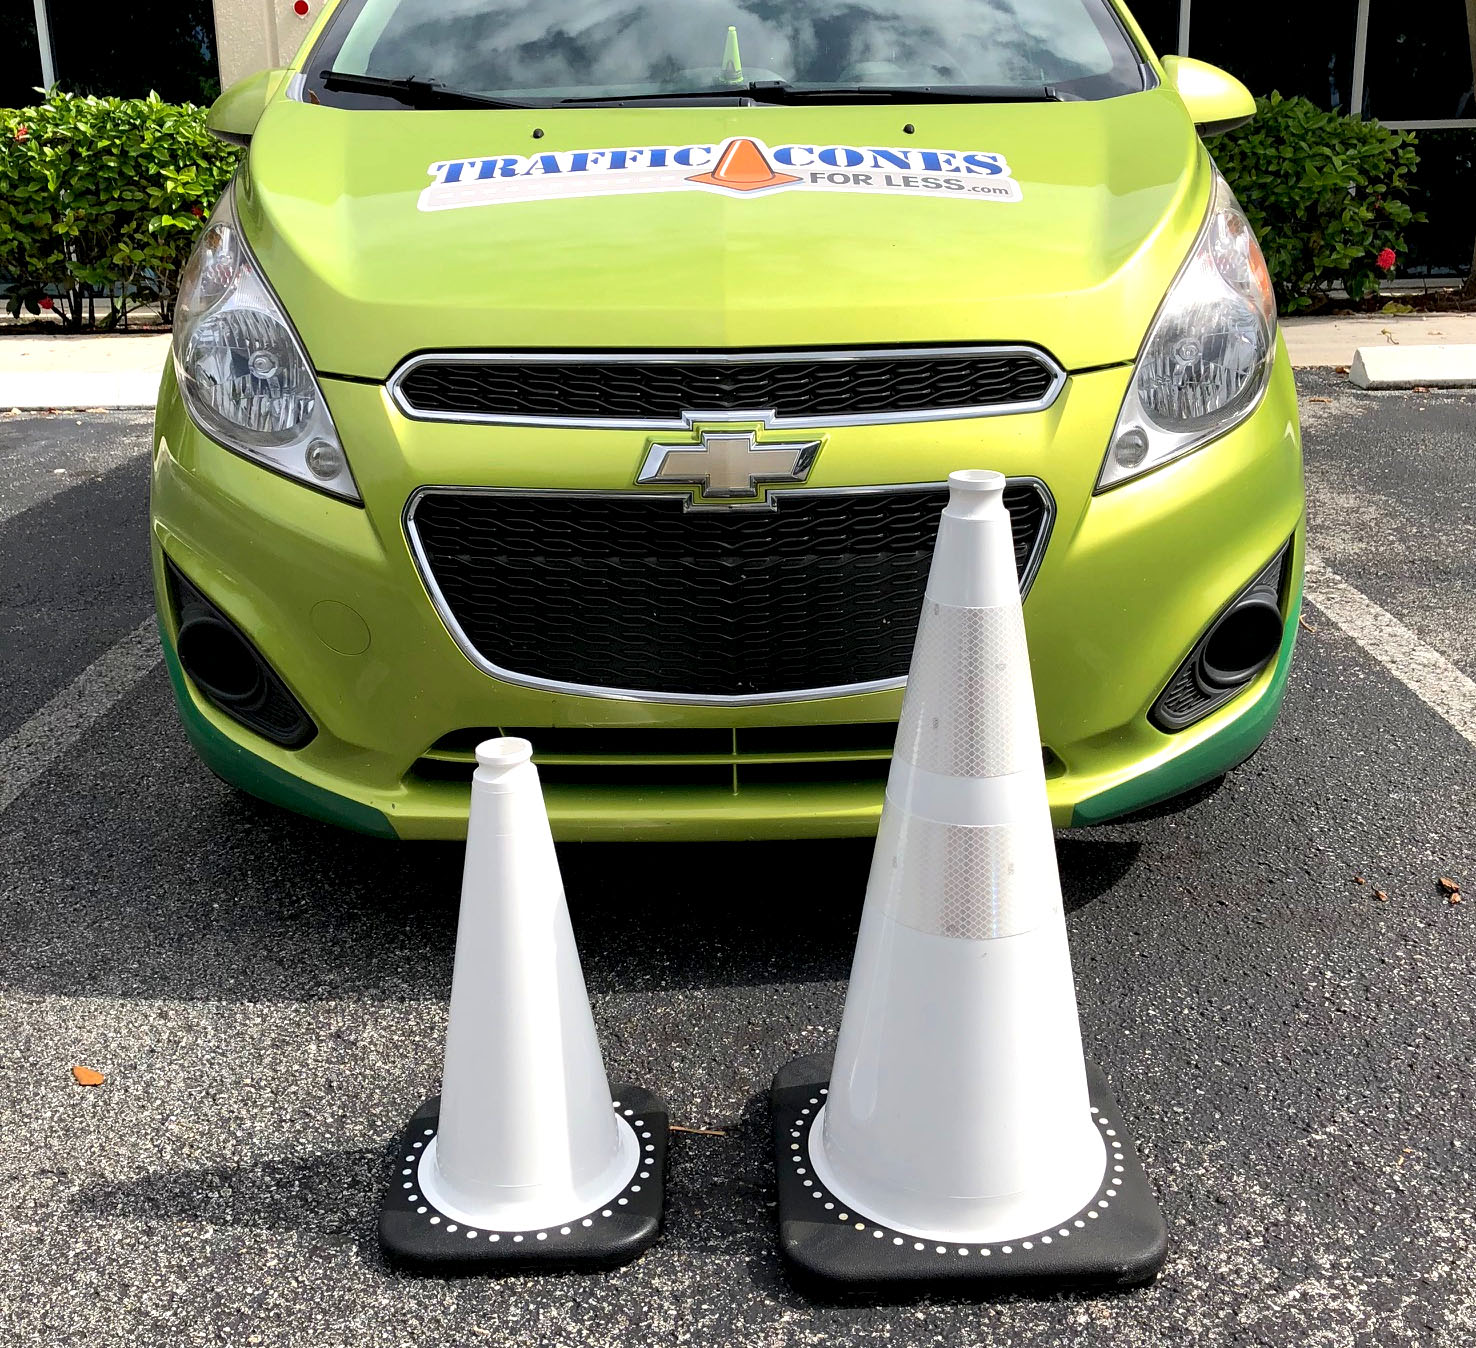 Search for traffic safety cones now! 